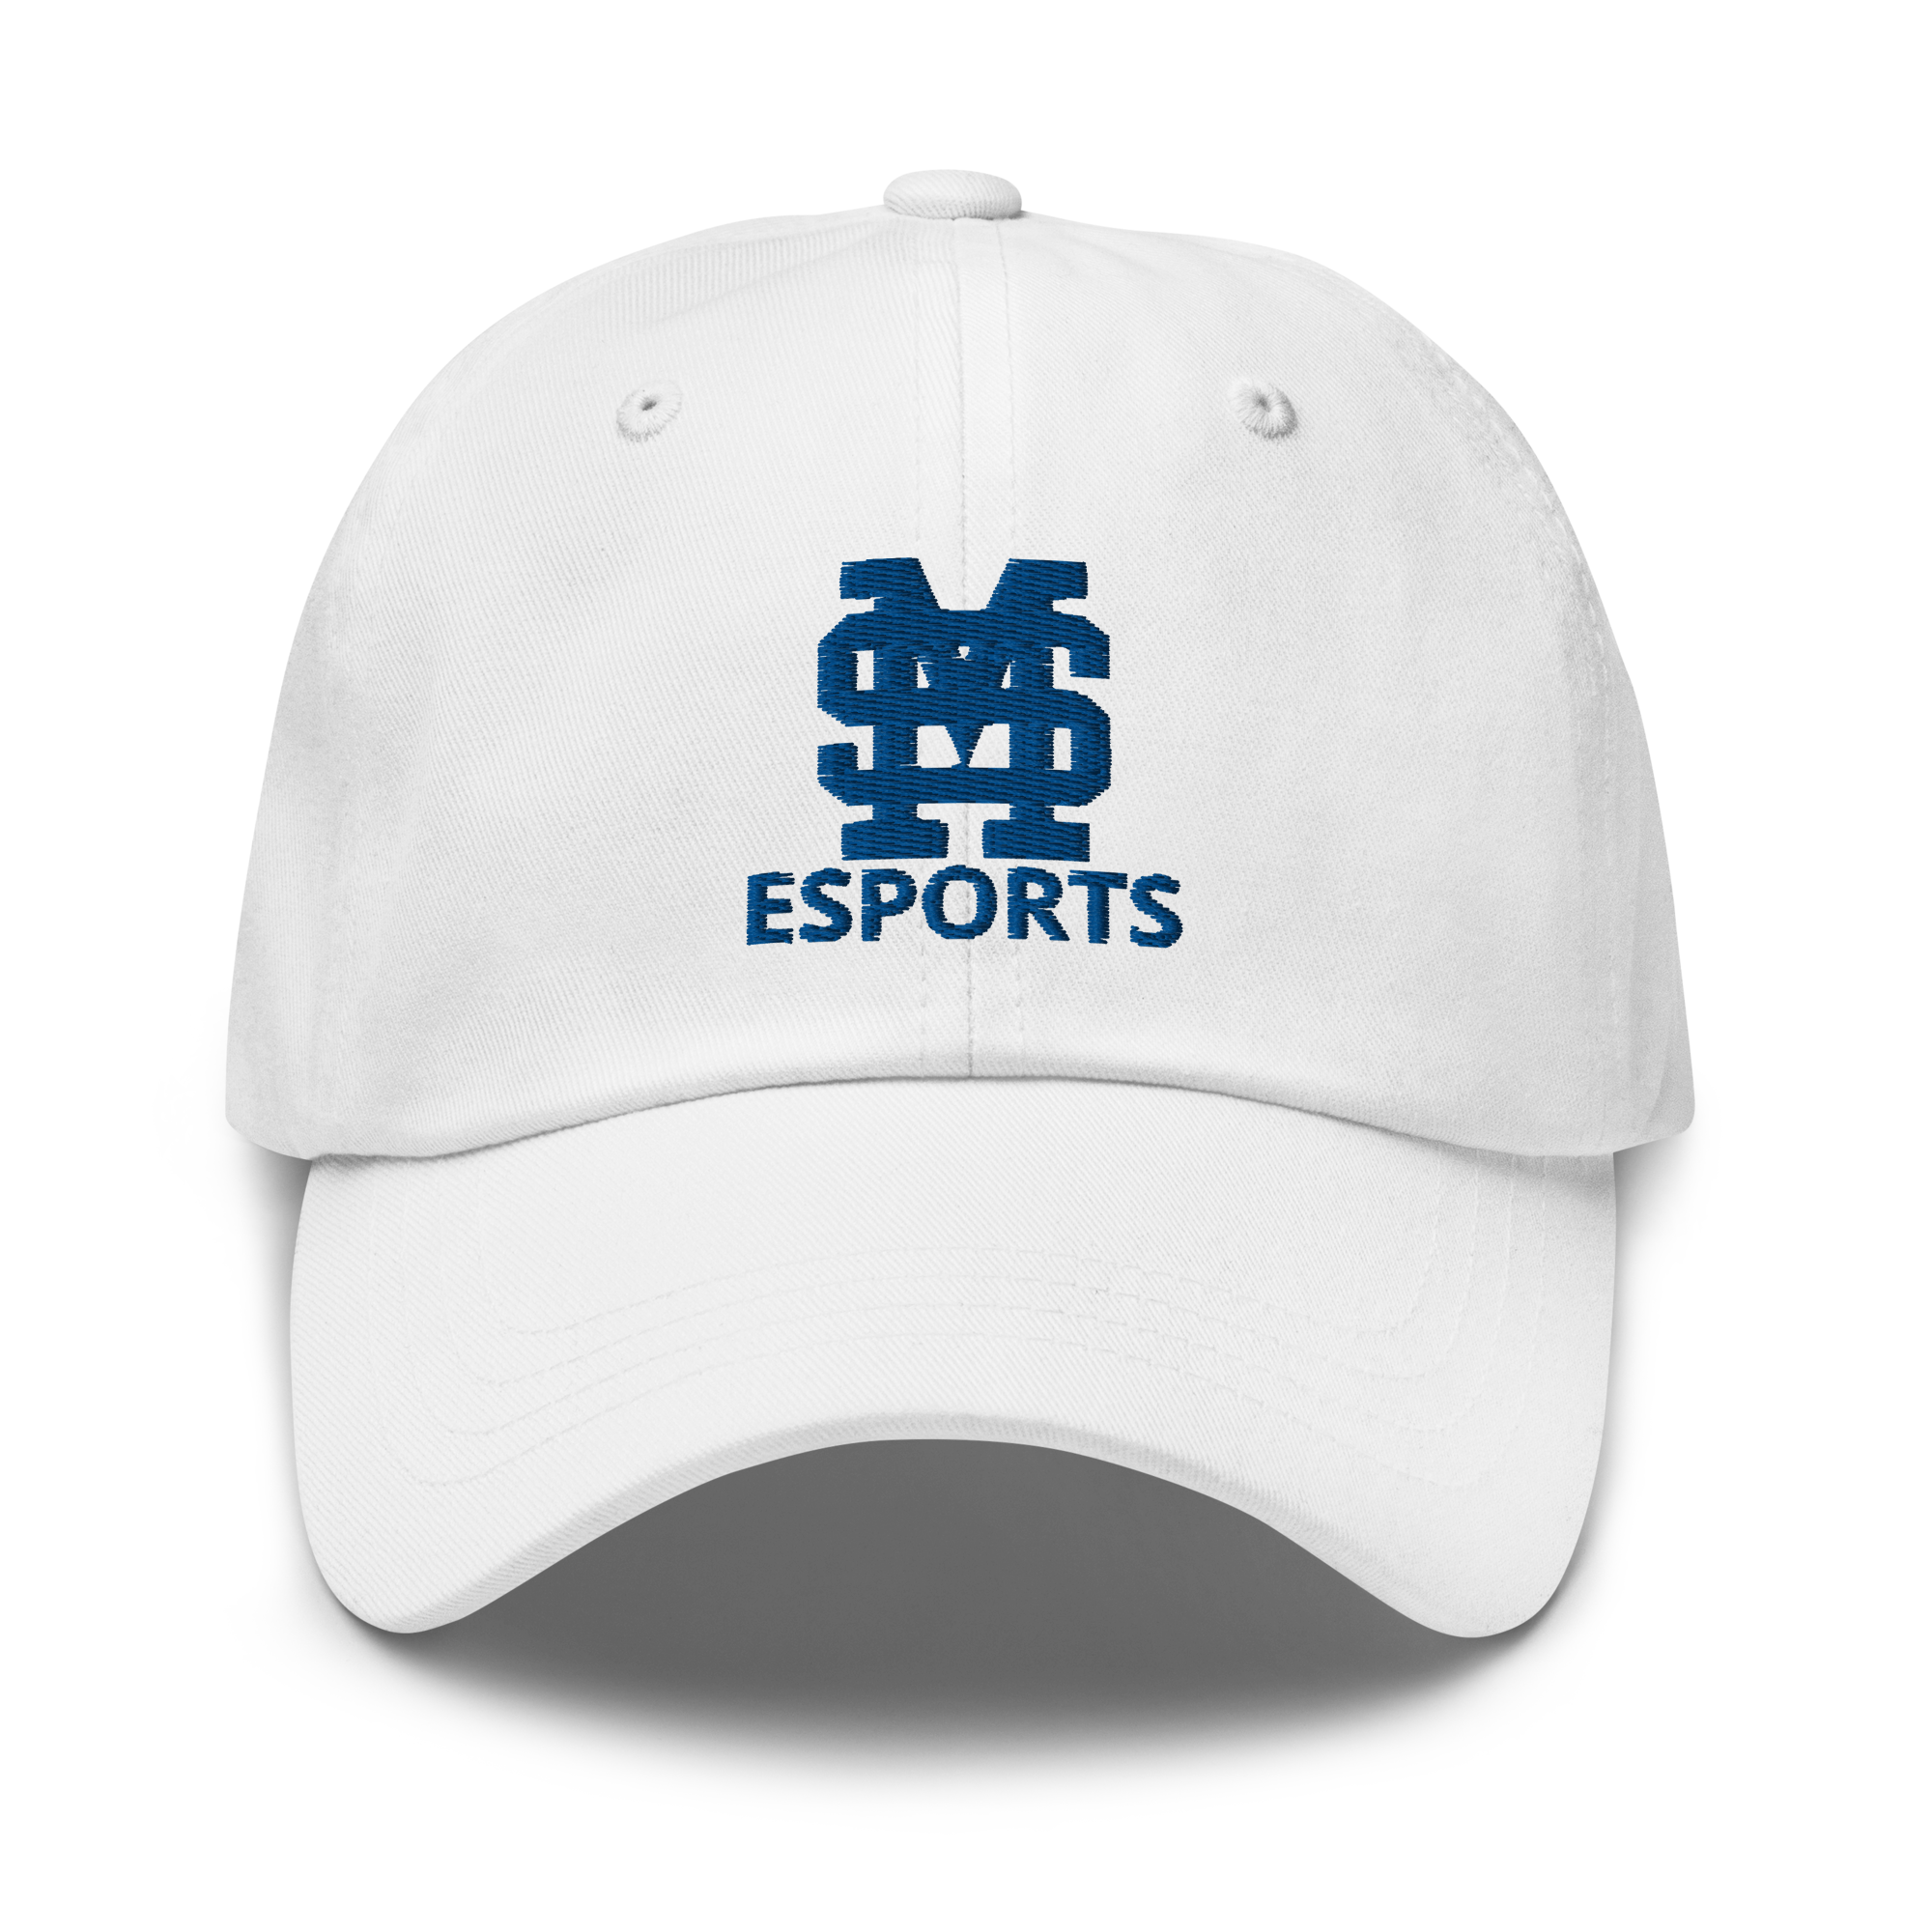 Mona Shores High School | On Demand | Embroidered Dad hat